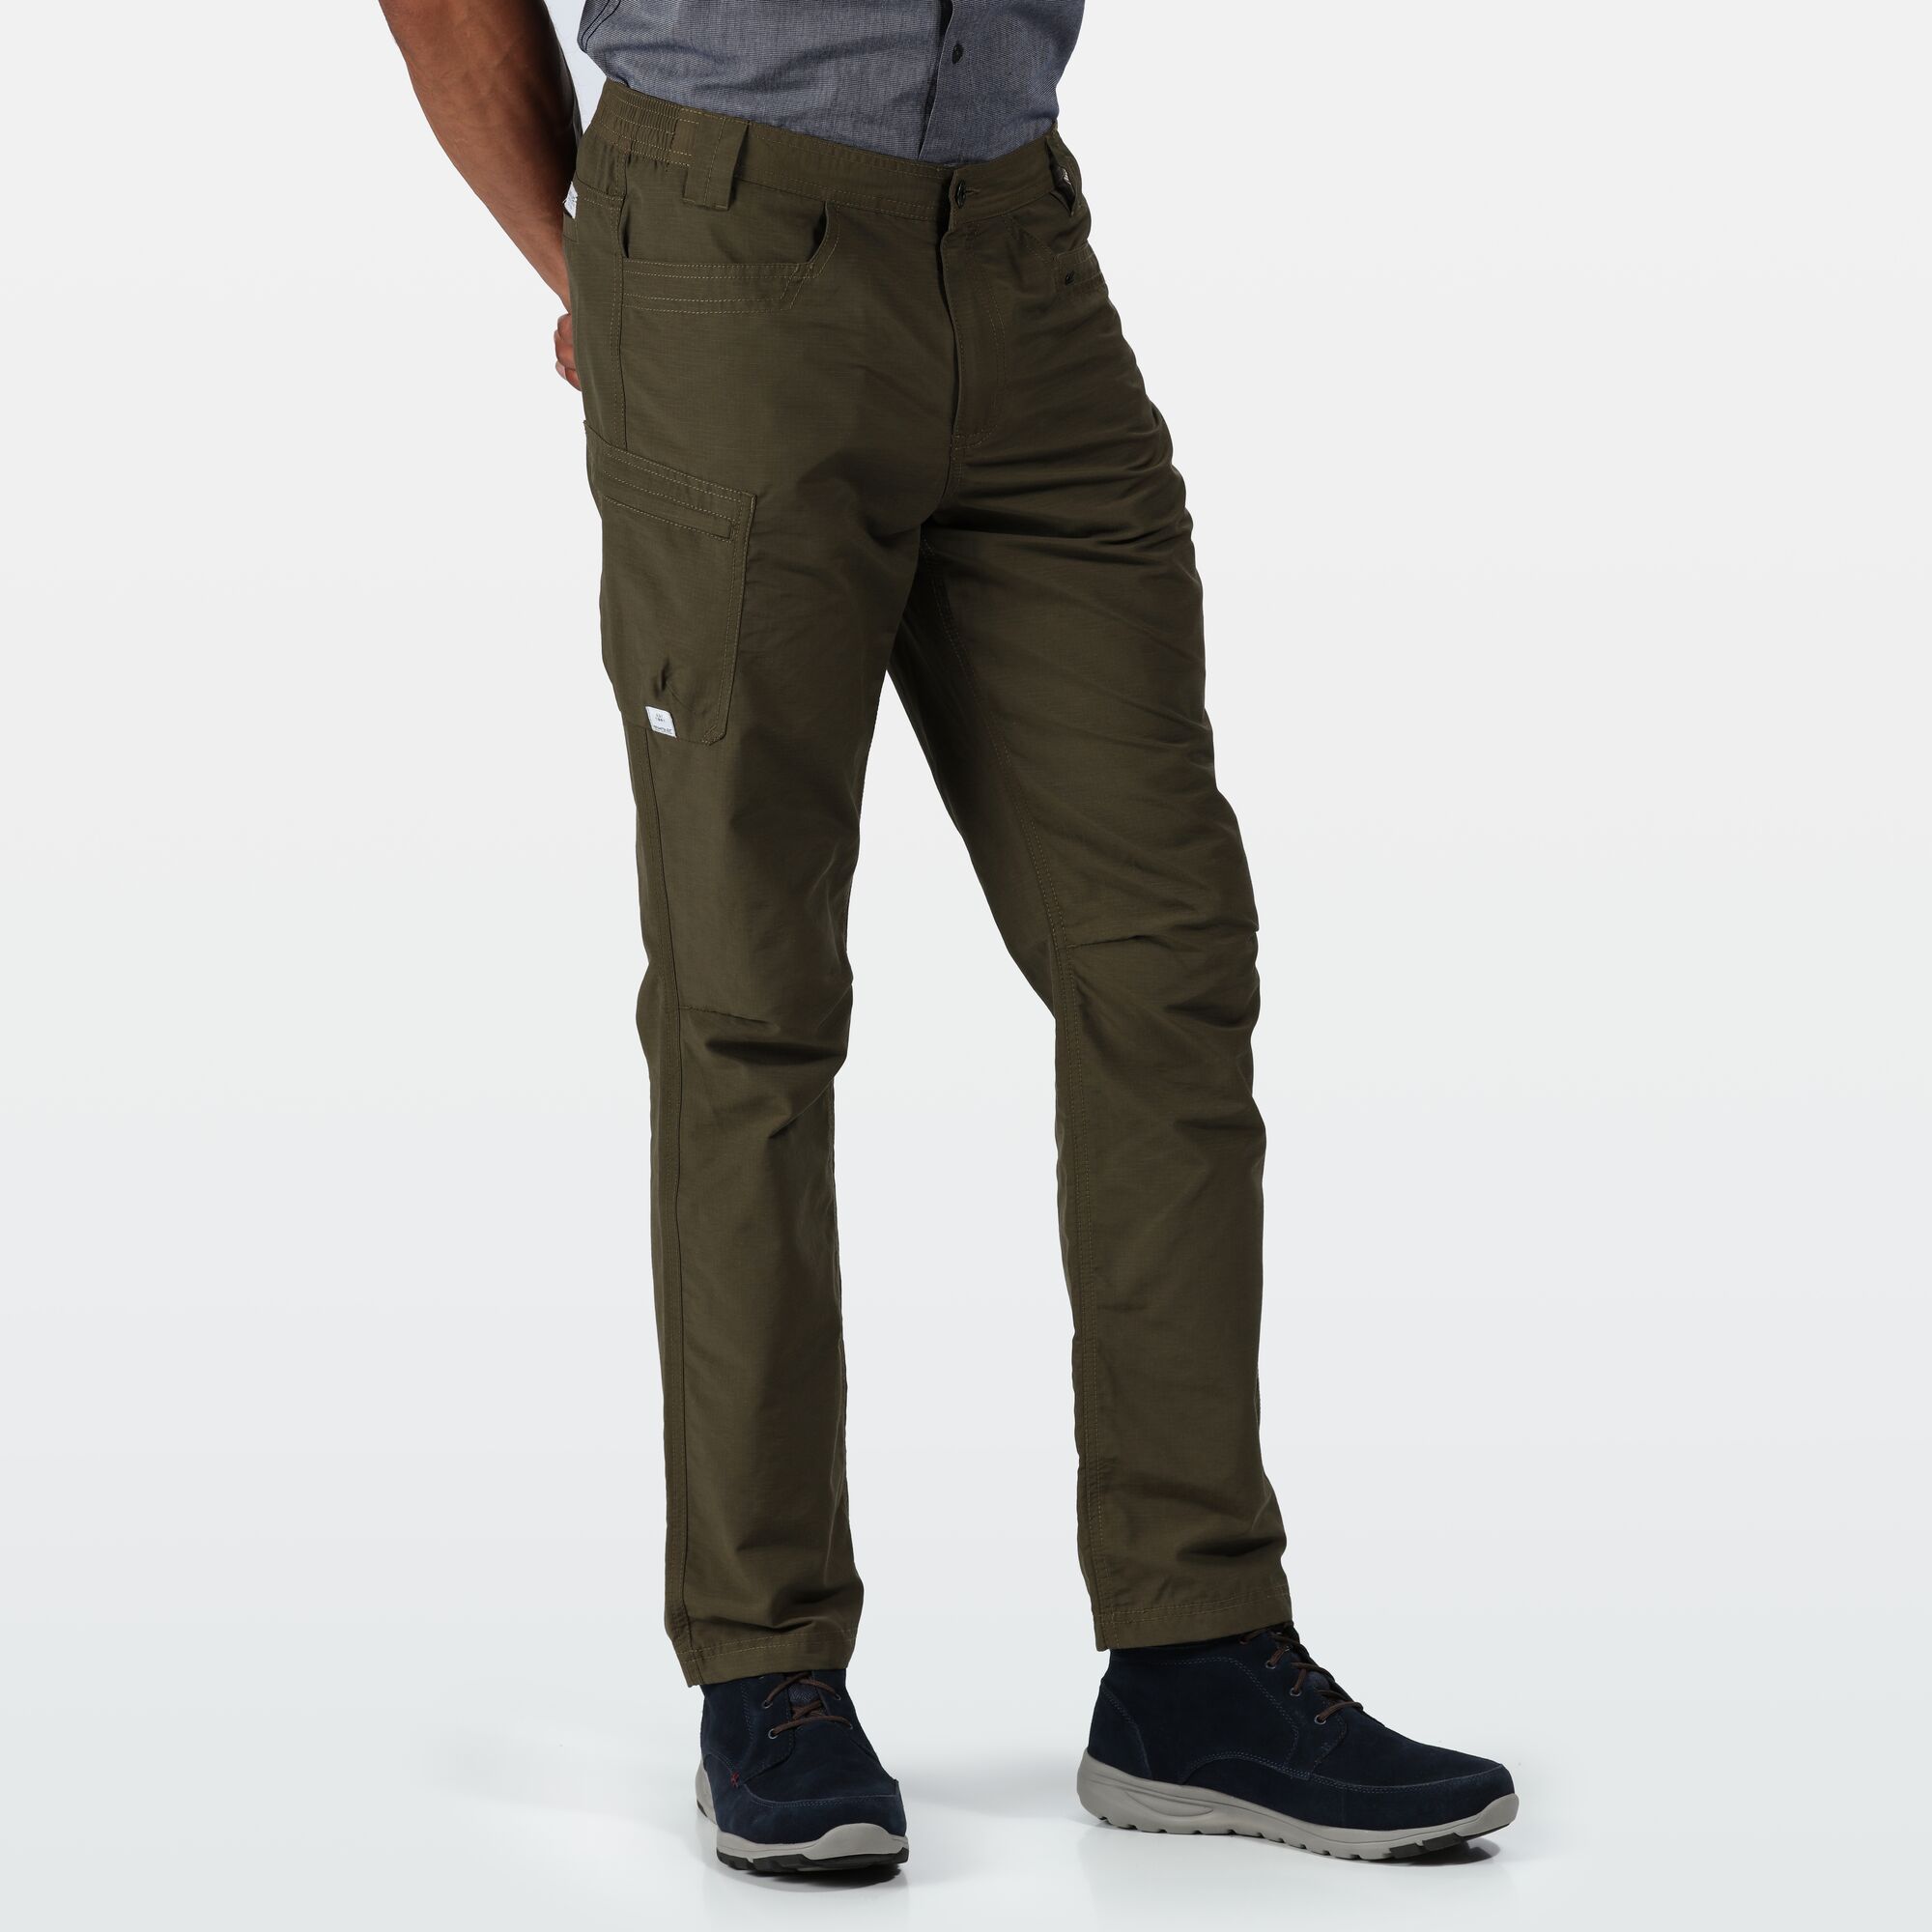 Material: Coolweave 70% Cotton/30% Polyester ripstop fabric. Lightweight trousers with button closure, zip fly and part-elasticated waist. Multi pocketed.